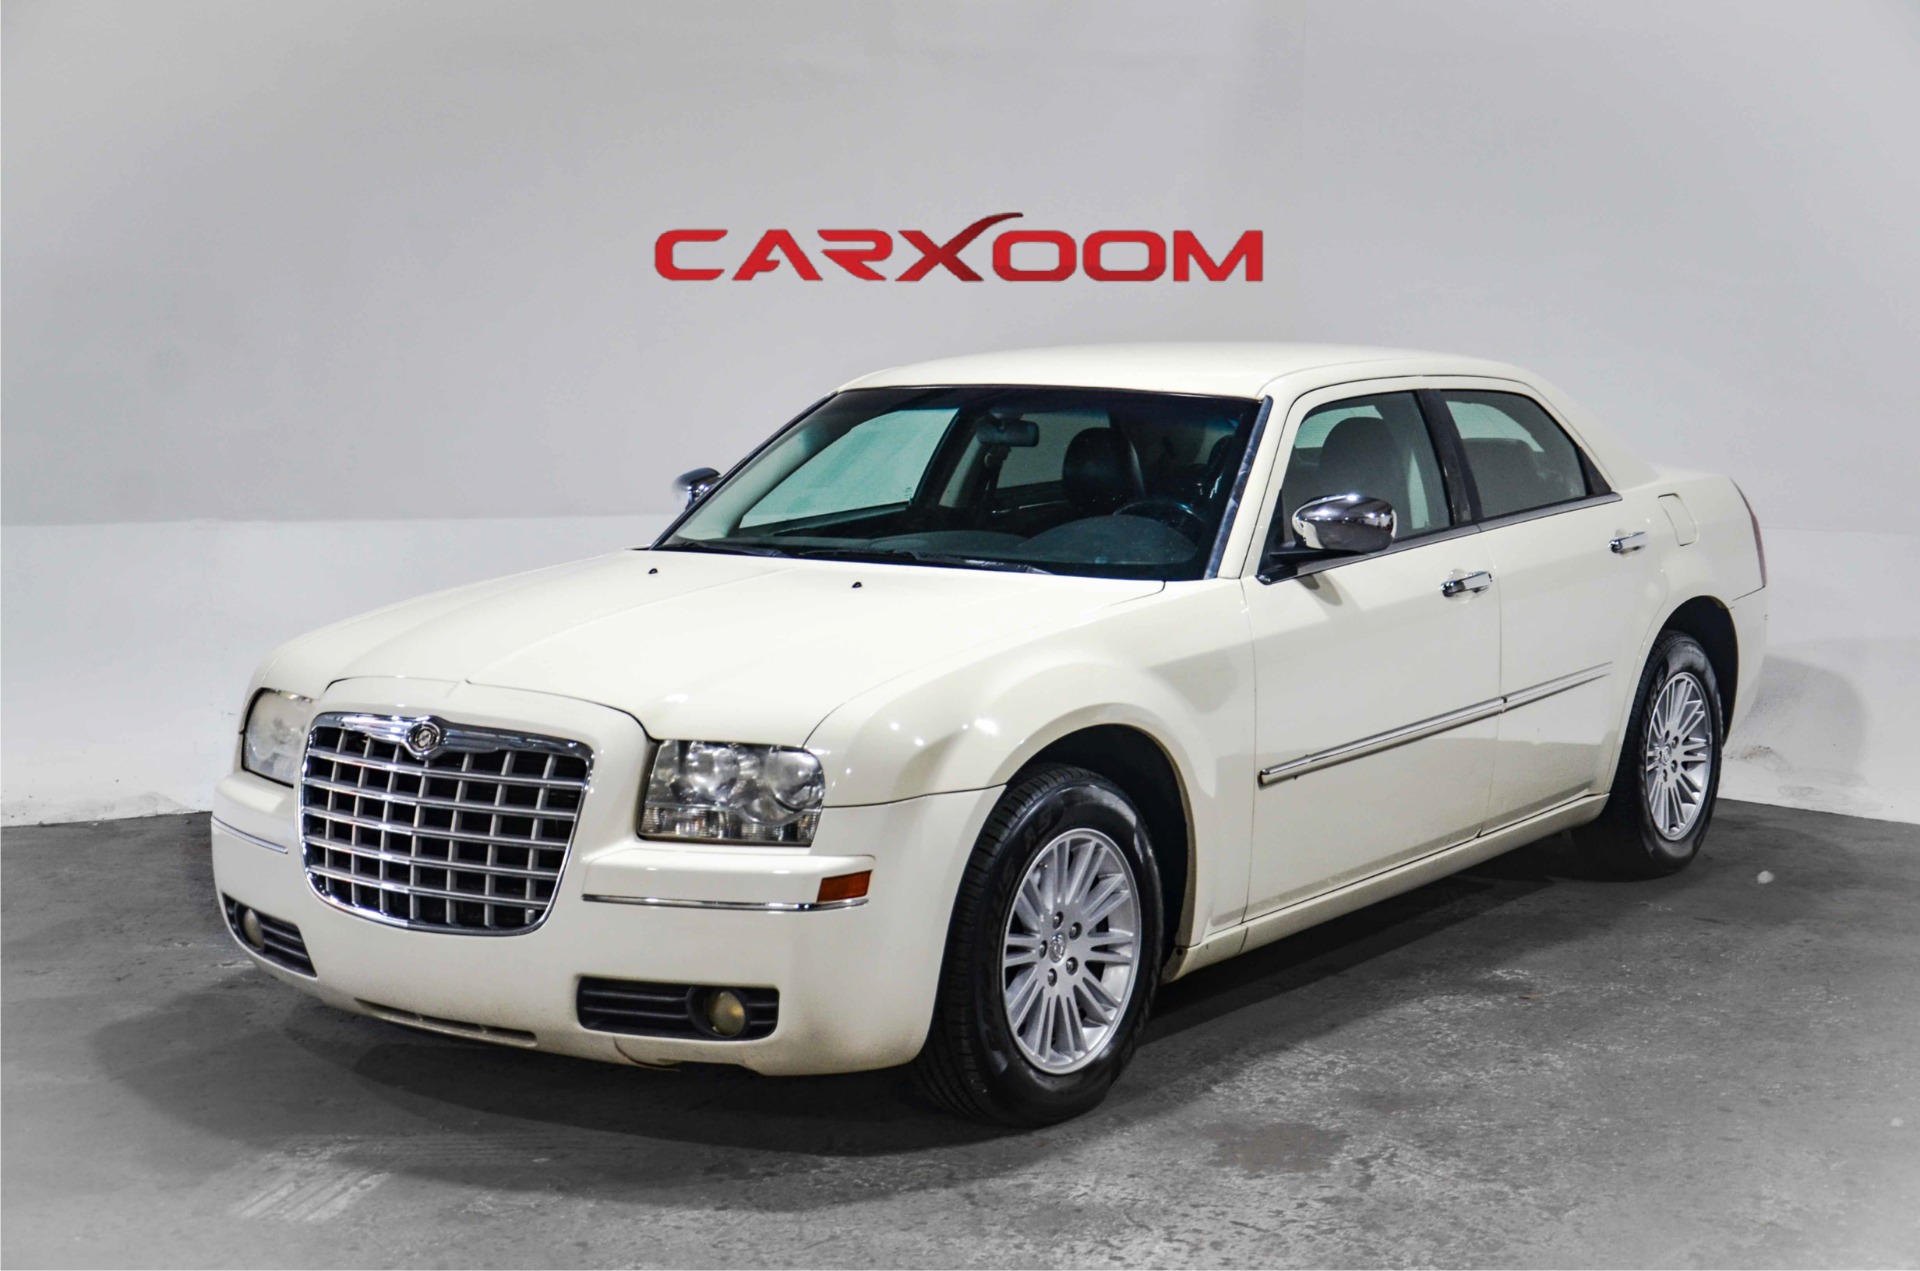 Used 2010 Chrysler 300 Touring For Sale Sold Car Xoom Stock 325290